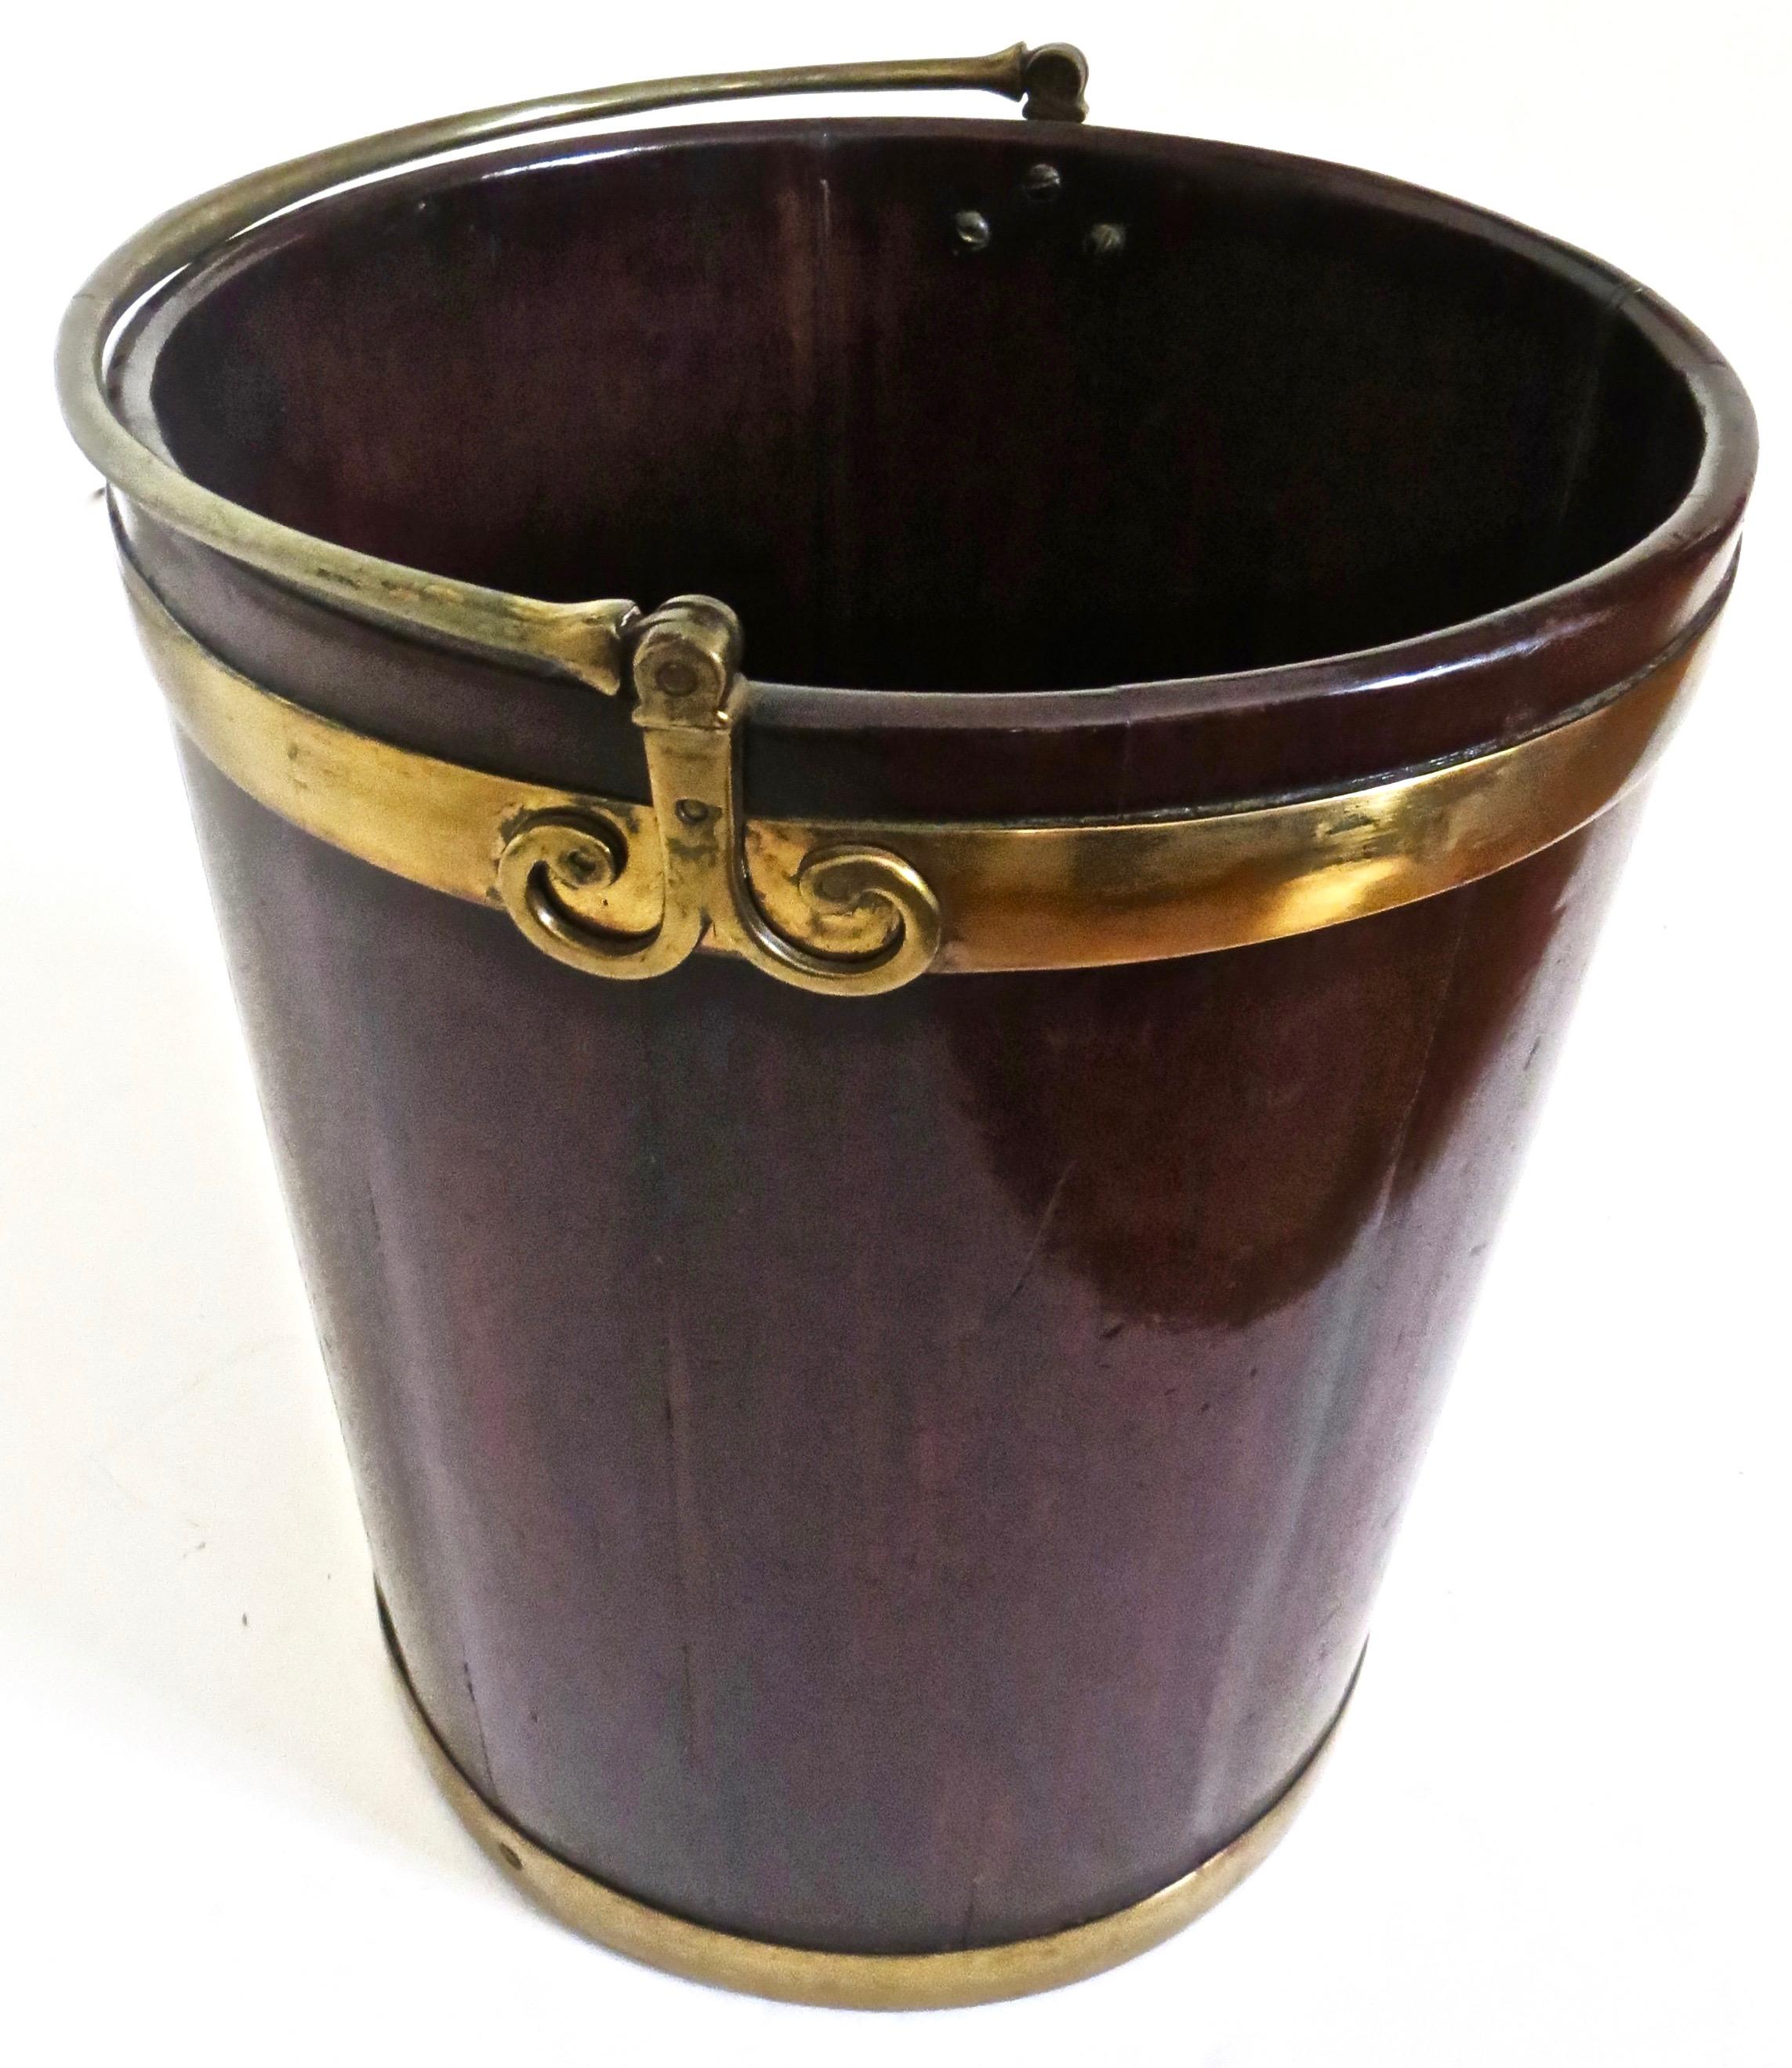 Pair of George III Mahogany Brass-Bound Buckets; 1 Peat and 1 Plate, English 7